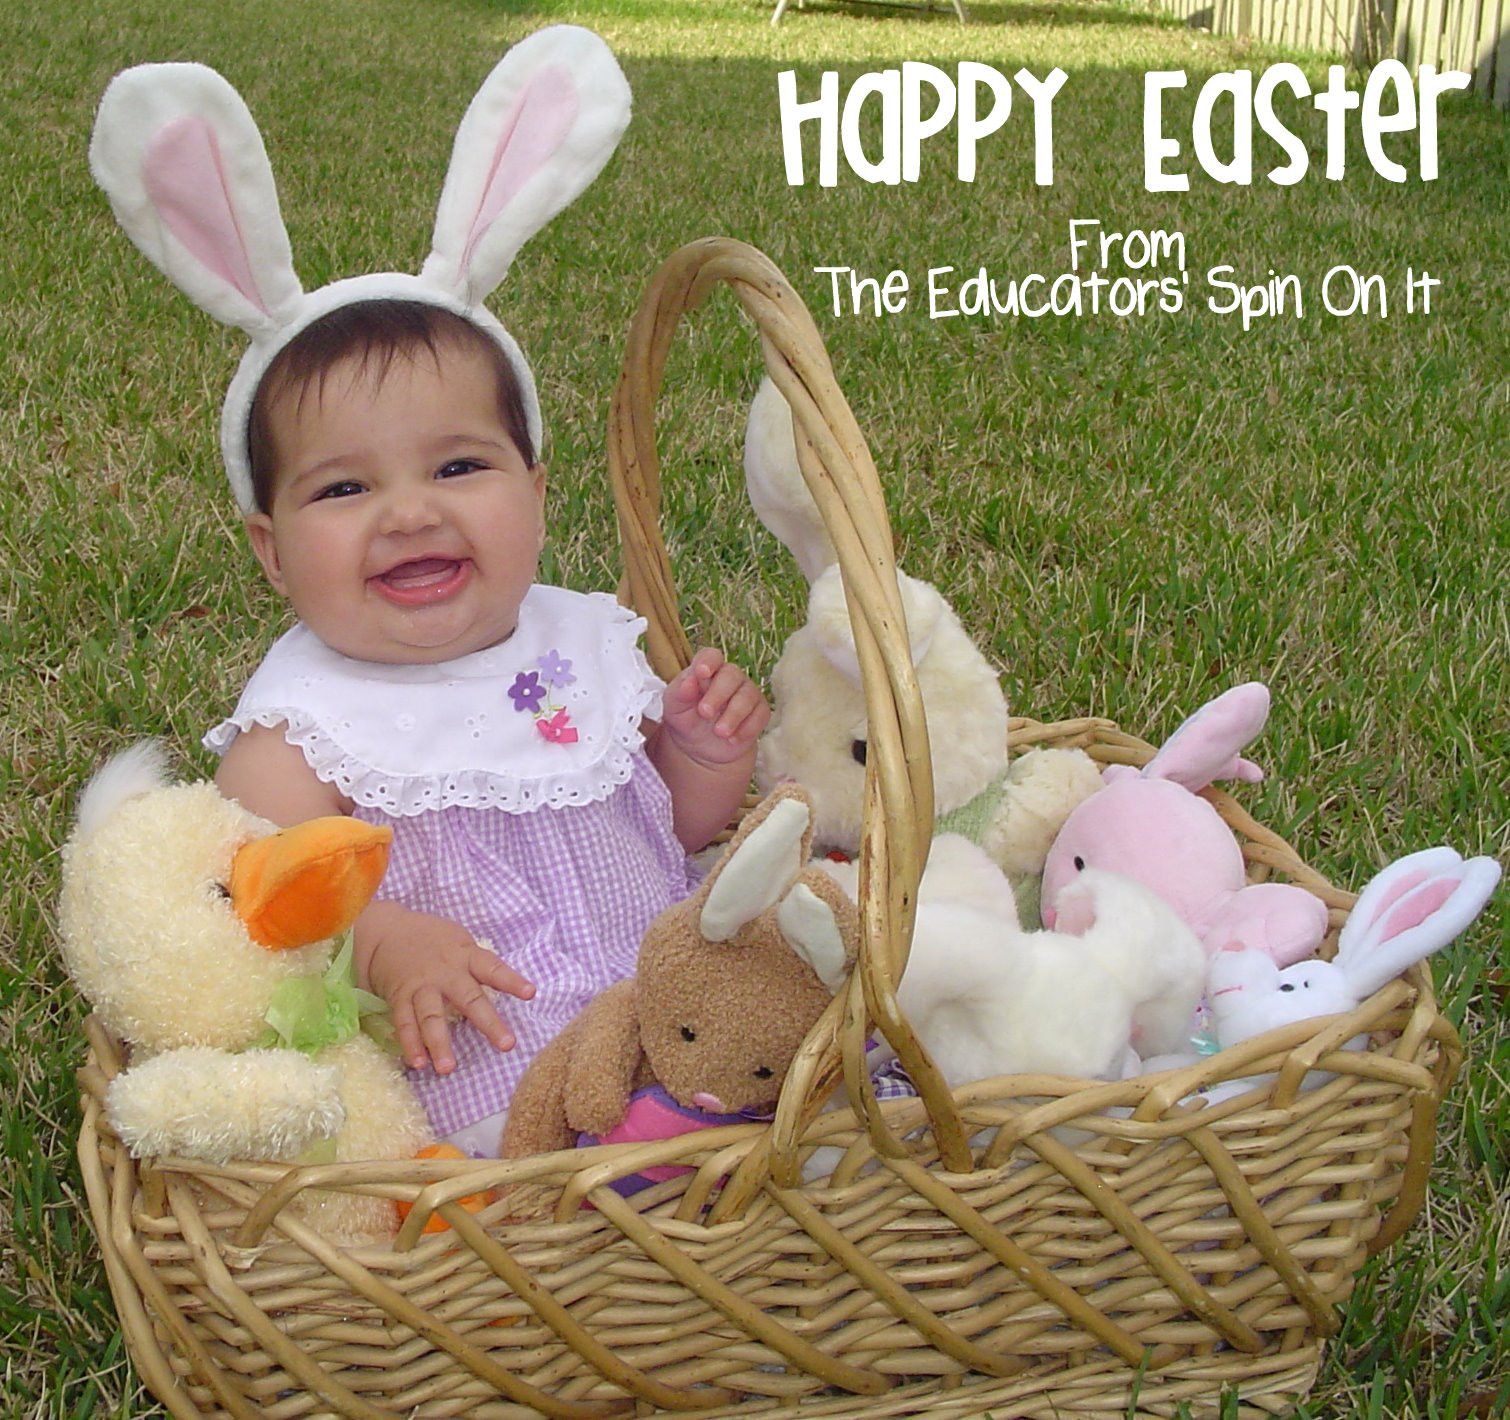 Easter Gifts For Infants
 Ideas for Easter Baskets for Babies The Educators Spin